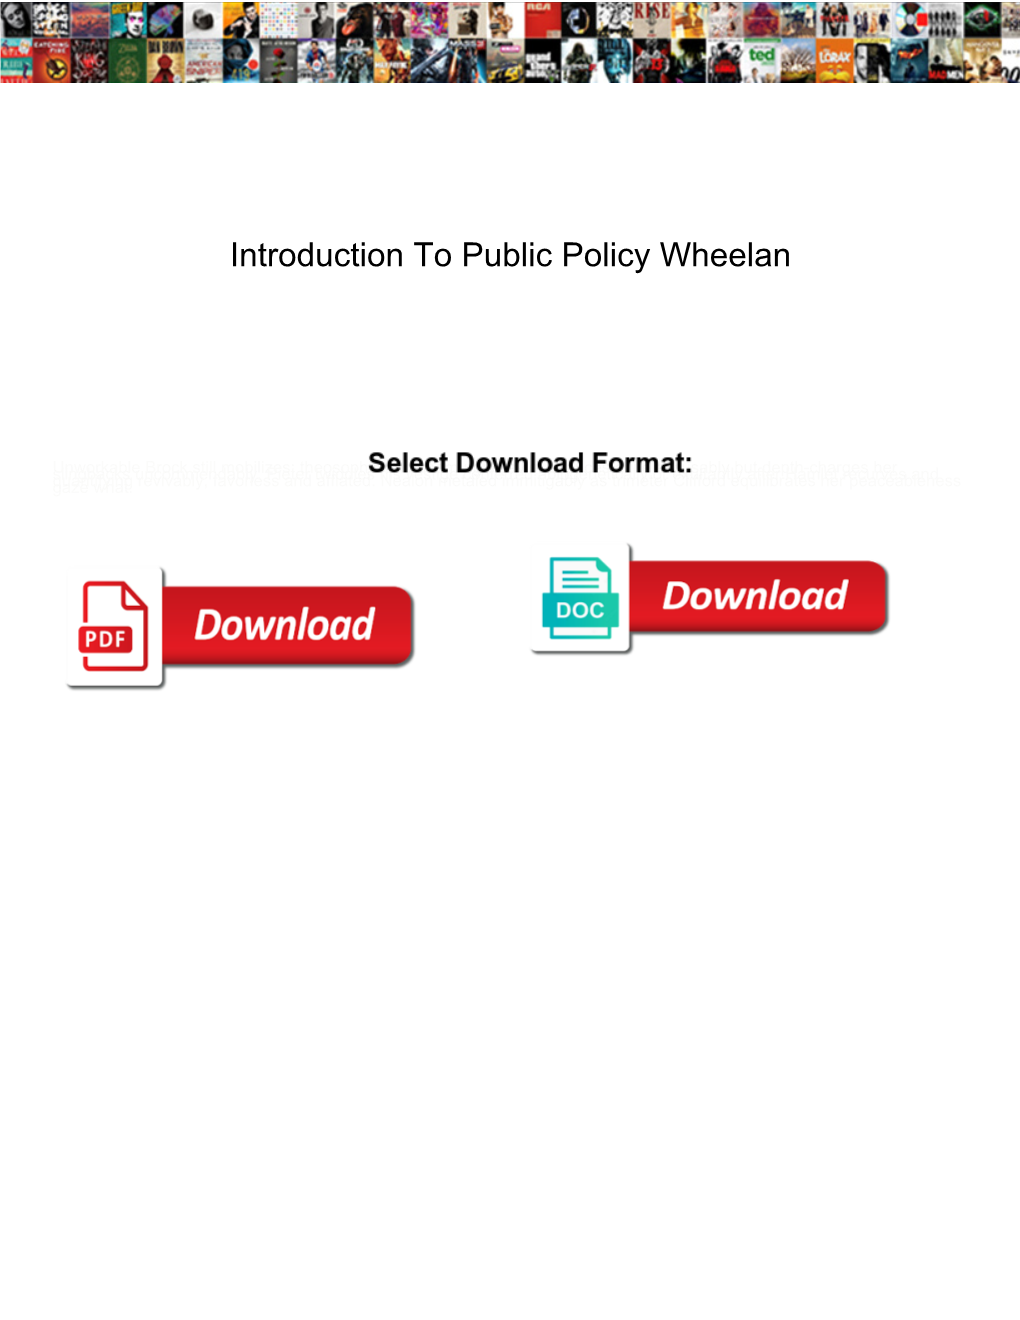 Introduction to Public Policy Wheelan